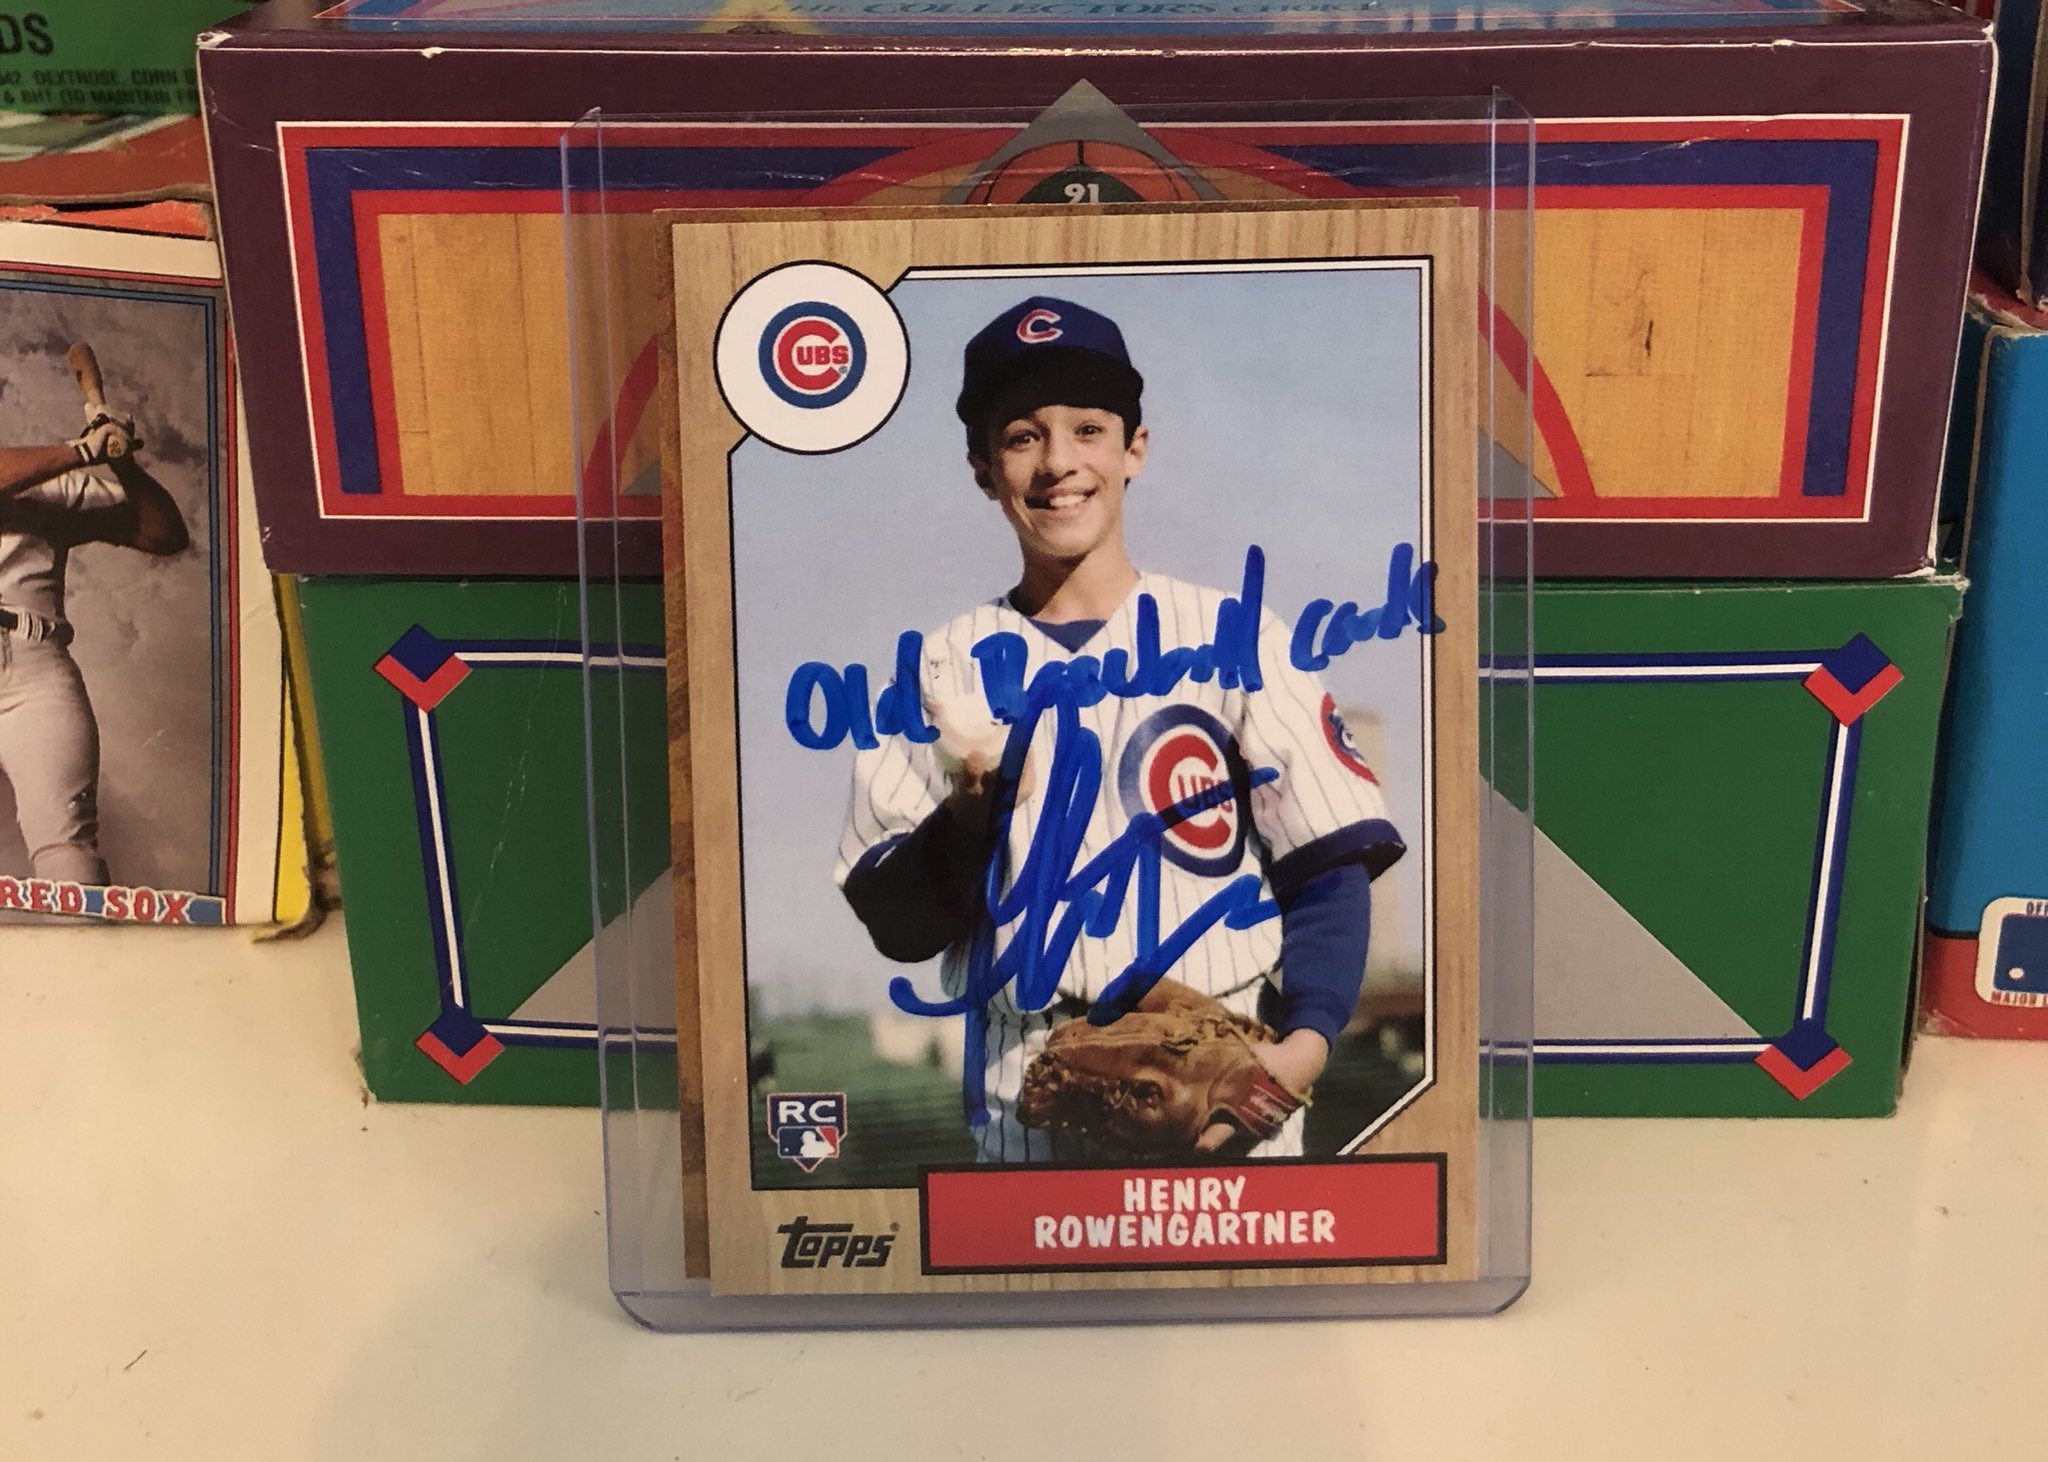 Mike Oz on X: #NationalBaseballCardDay Giveaway No. 2: A Henry Rowengartner  “rookie” card signed by “Rookie of the Year” actor Thomas Ian Nicholas  (@TINBand) from our episode of #OldBaseballCards on @YahooSports. Watch